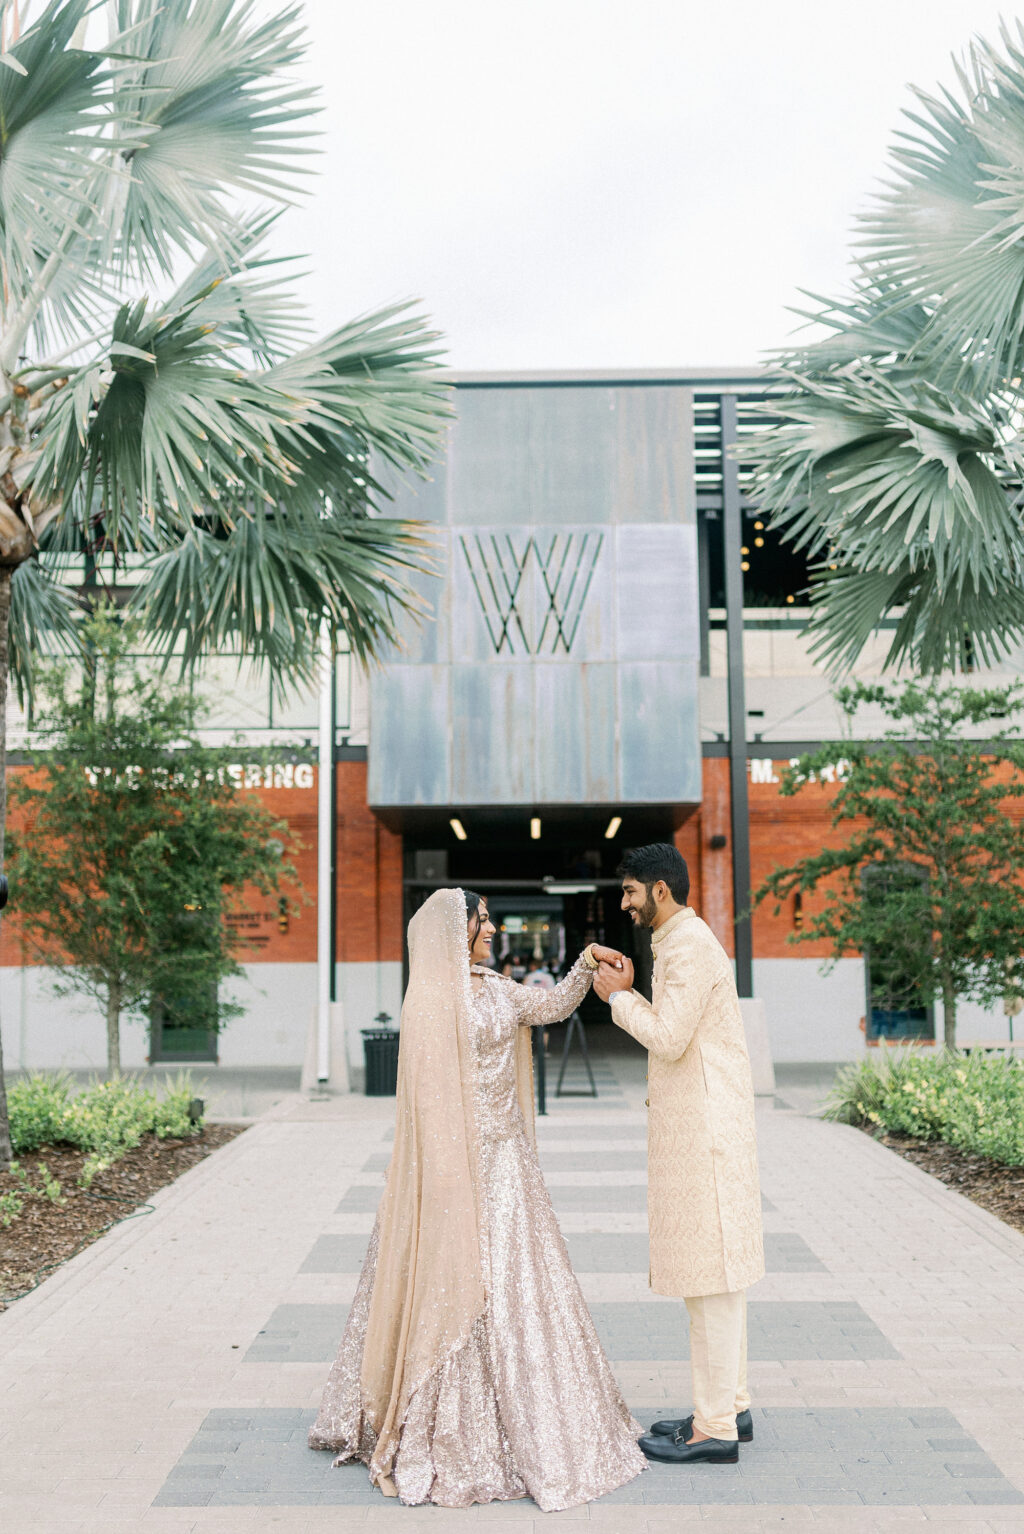 Bride and Groom Outdoor Wedding Portrait | Tampa Bay Videographer Shannon Kelly Films | Photographer Dewitt For Love | Venue Armature Works